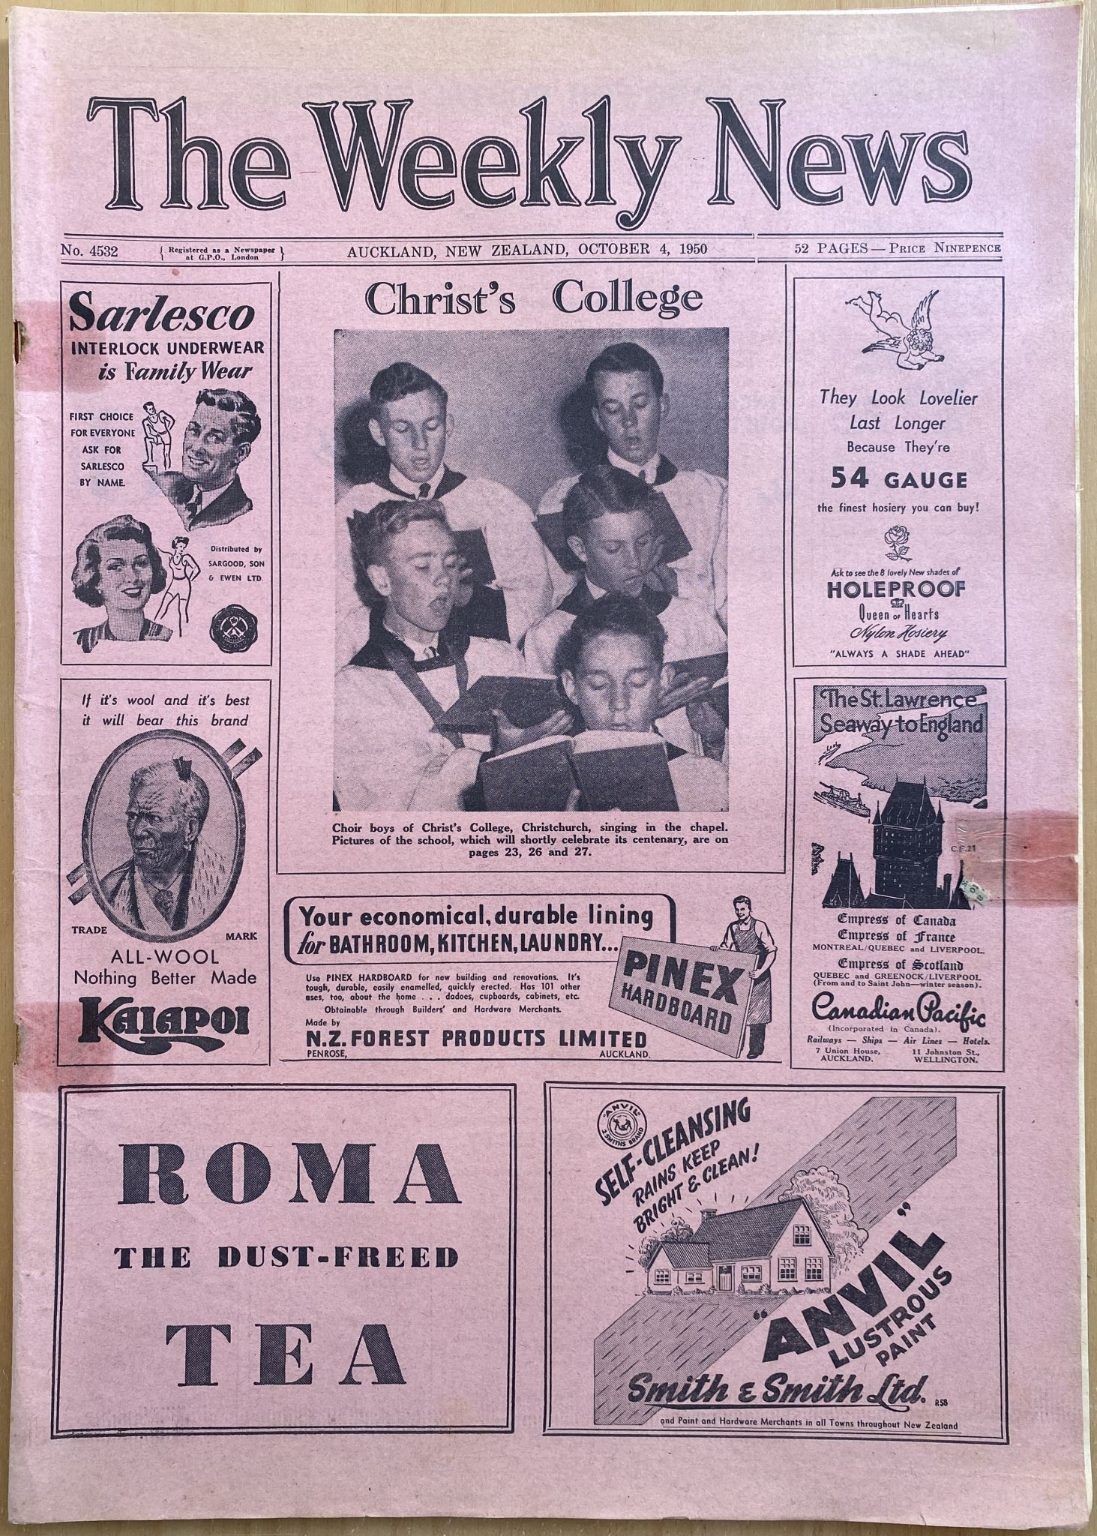 OLD NEWSPAPER: The Weekly News, No. 4532, 4 October 1950